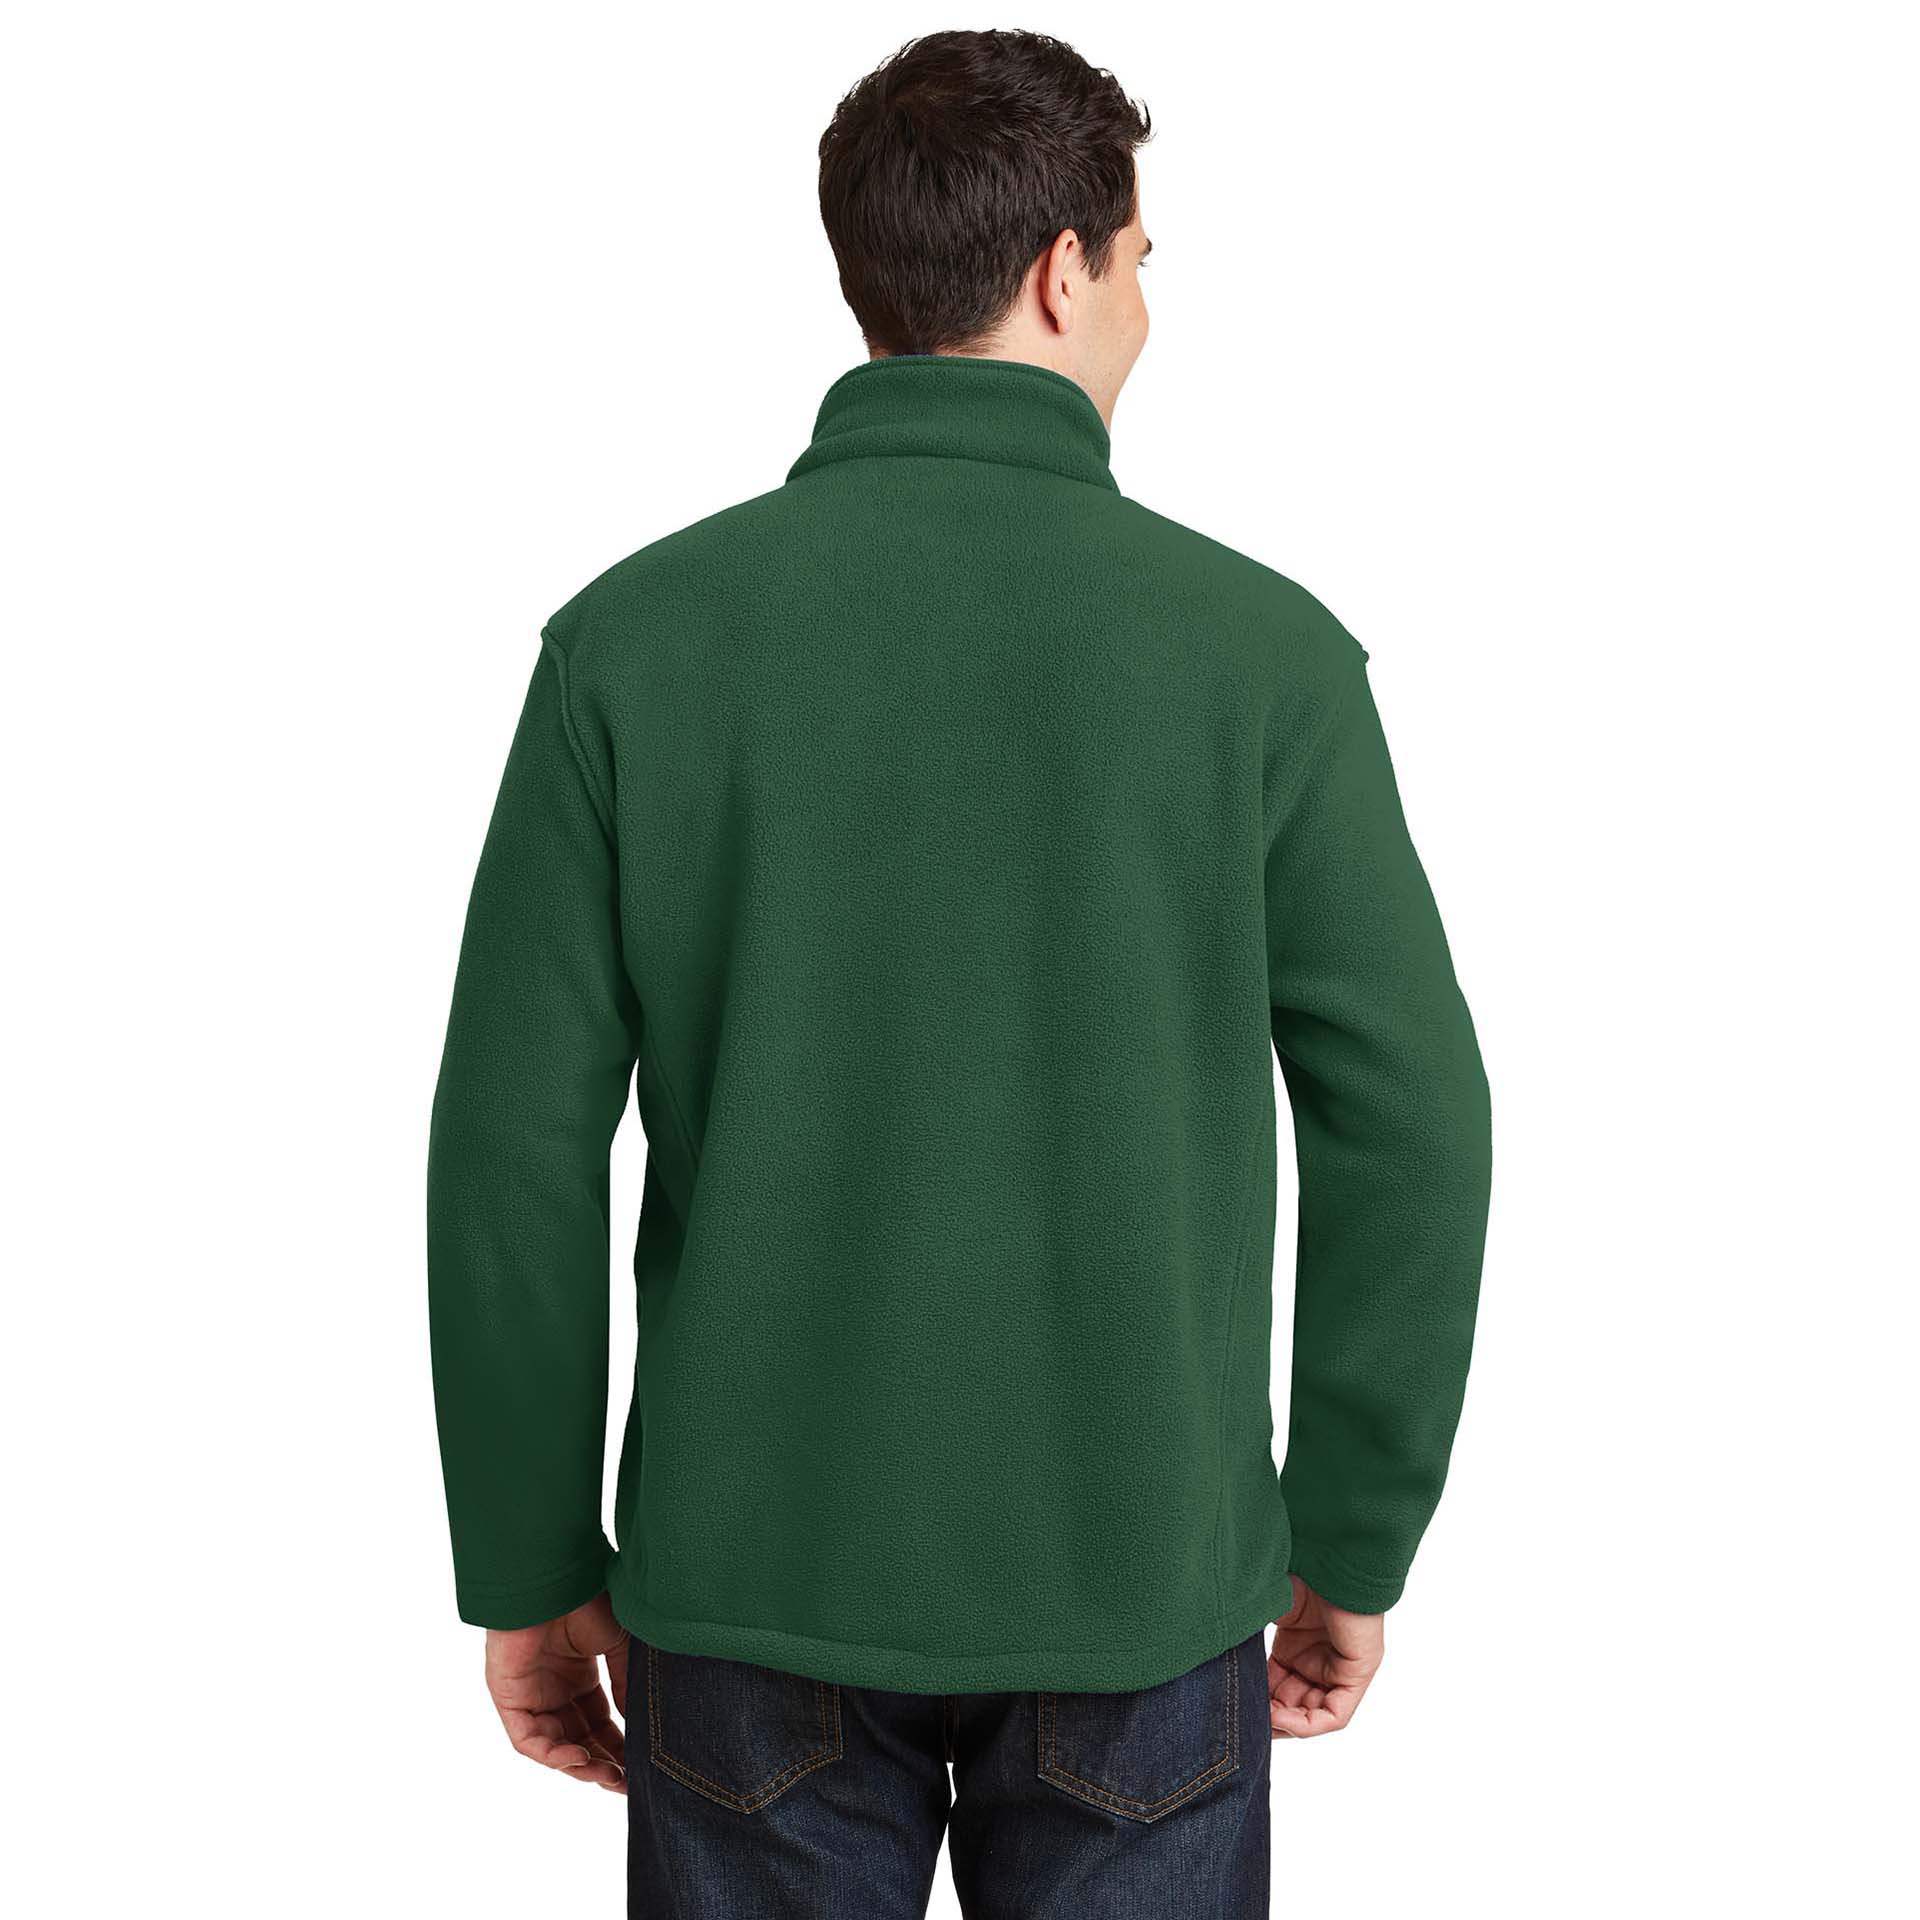 Port Authority F217 Value Fleece Jacket - Forest Green | Full Source